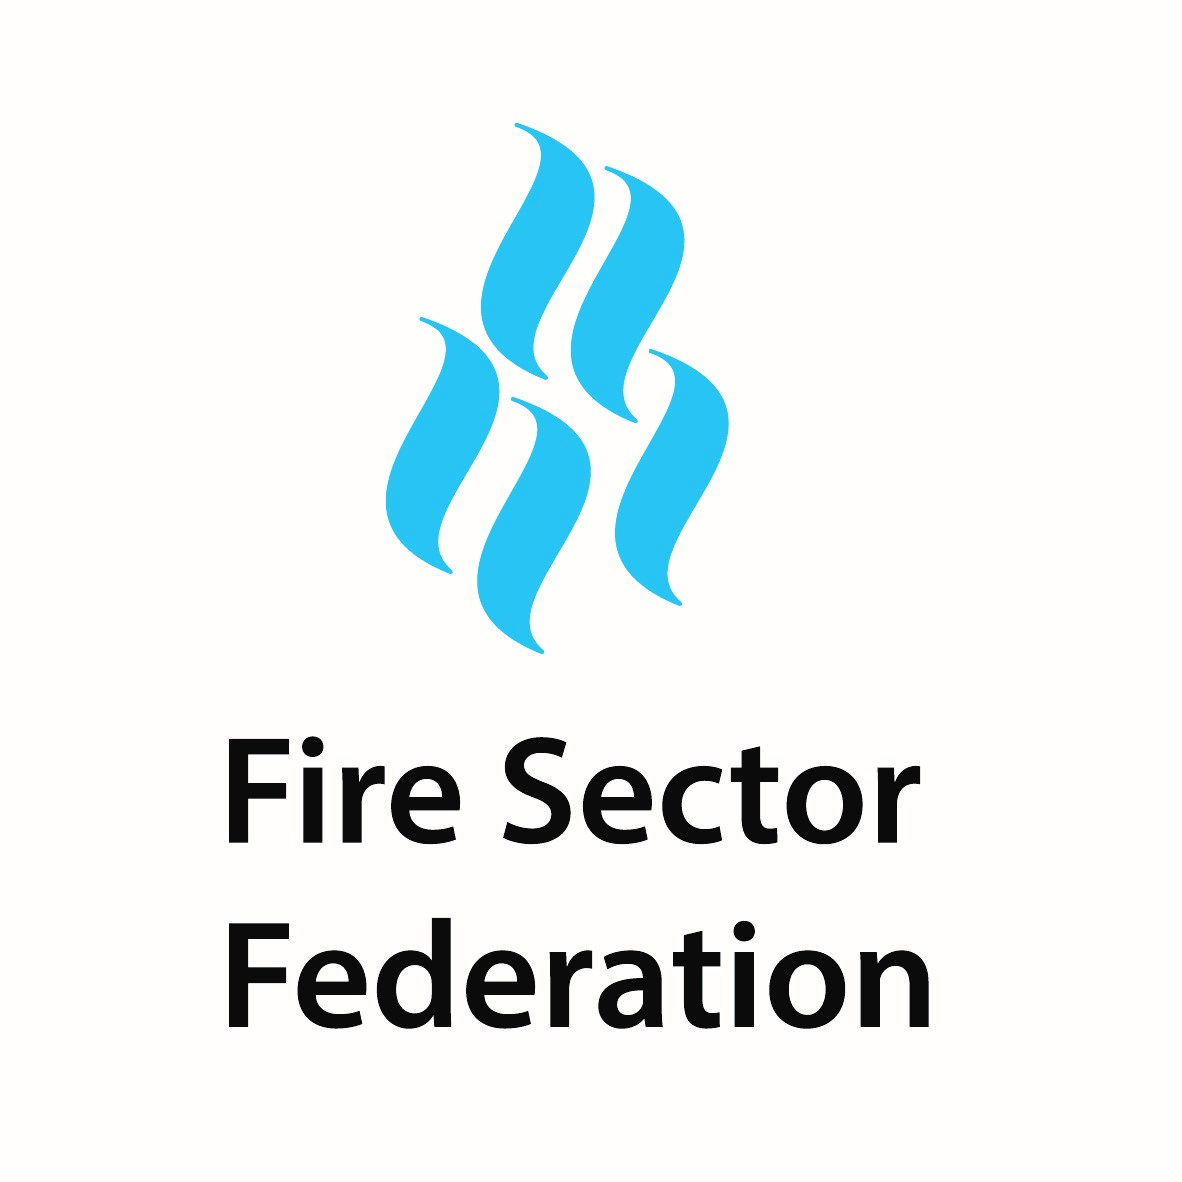 Fire Safety Federation